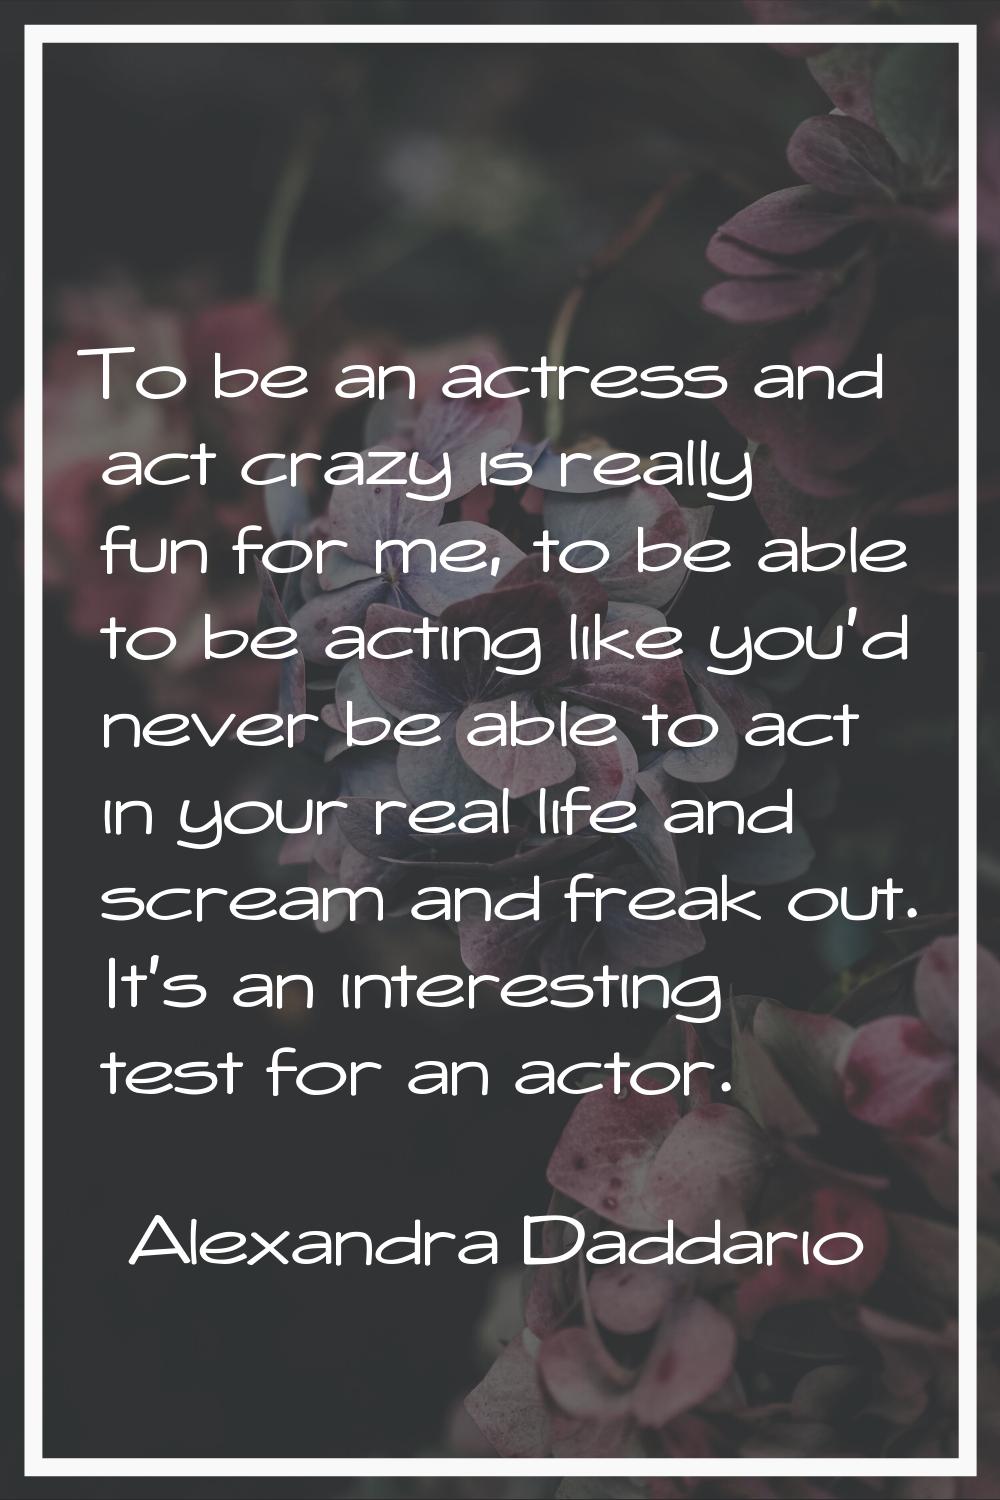 To be an actress and act crazy is really fun for me, to be able to be acting like you'd never be ab